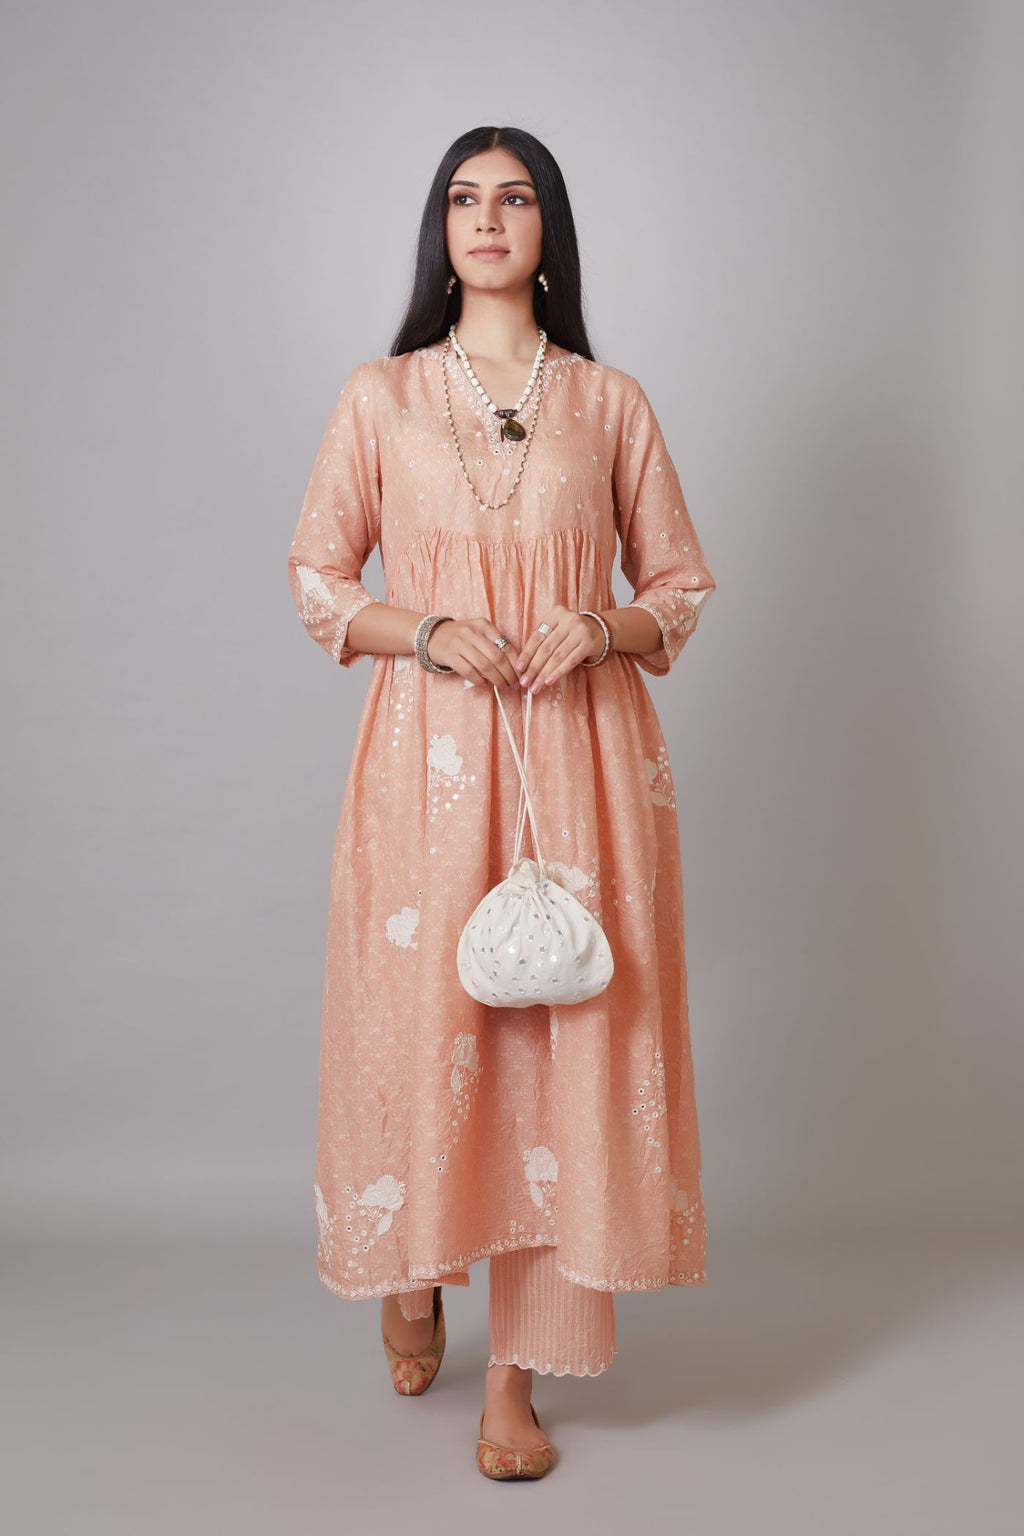 Hand block printed crushed silk kurta set with wavy empire waistline and gathers, highlighted with applique flower embroidery and mirror hand work.